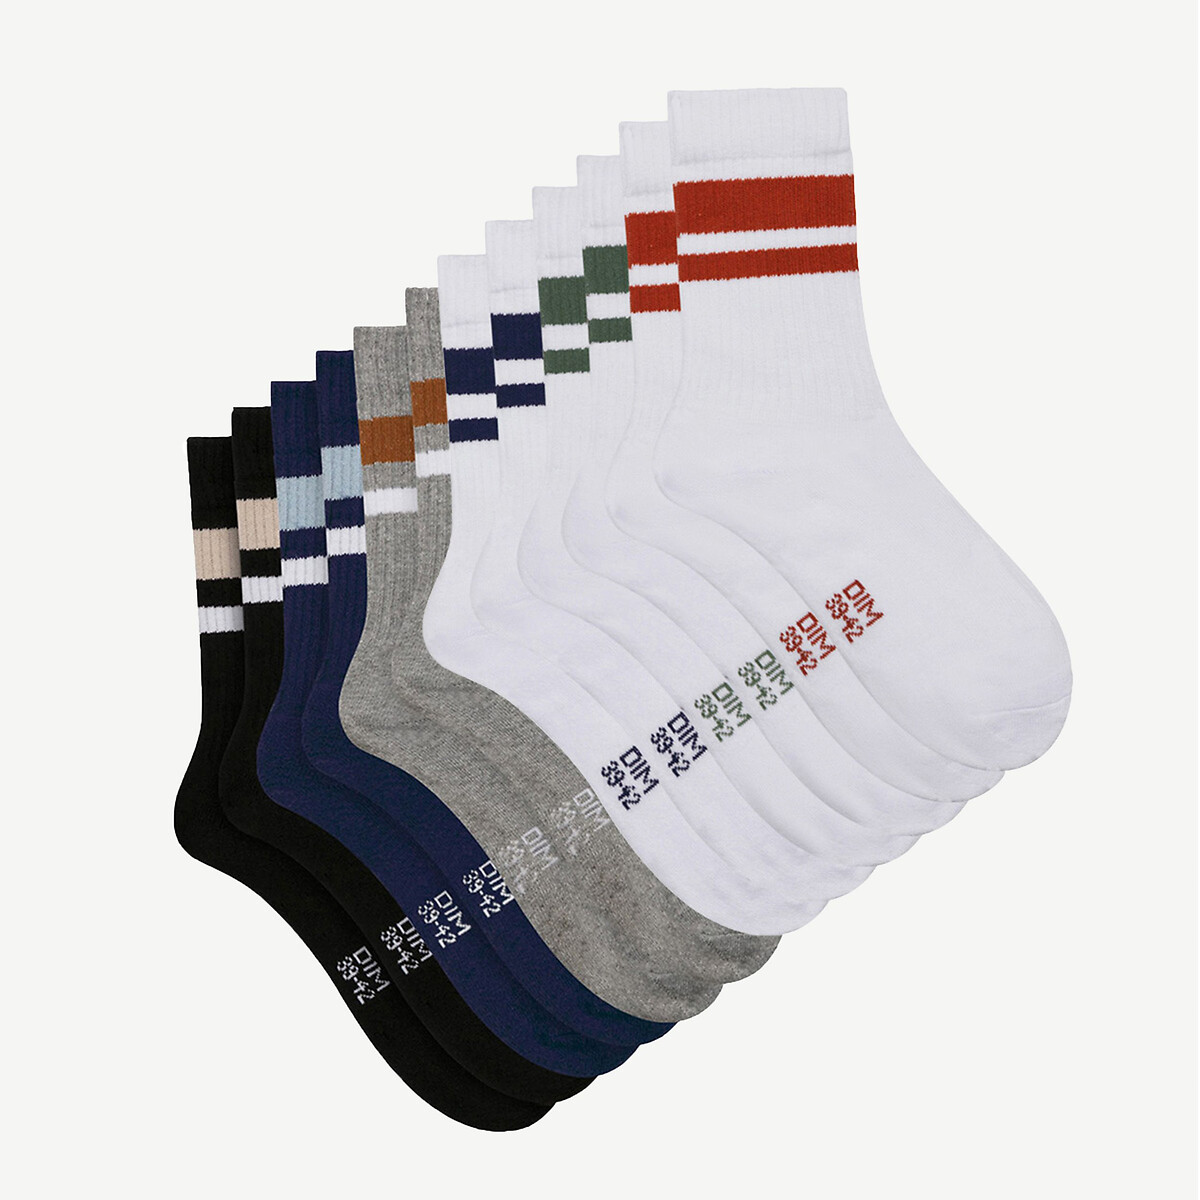 Image of Pack of 6 Pairs of Sports Crew Socks in Cotton Mix